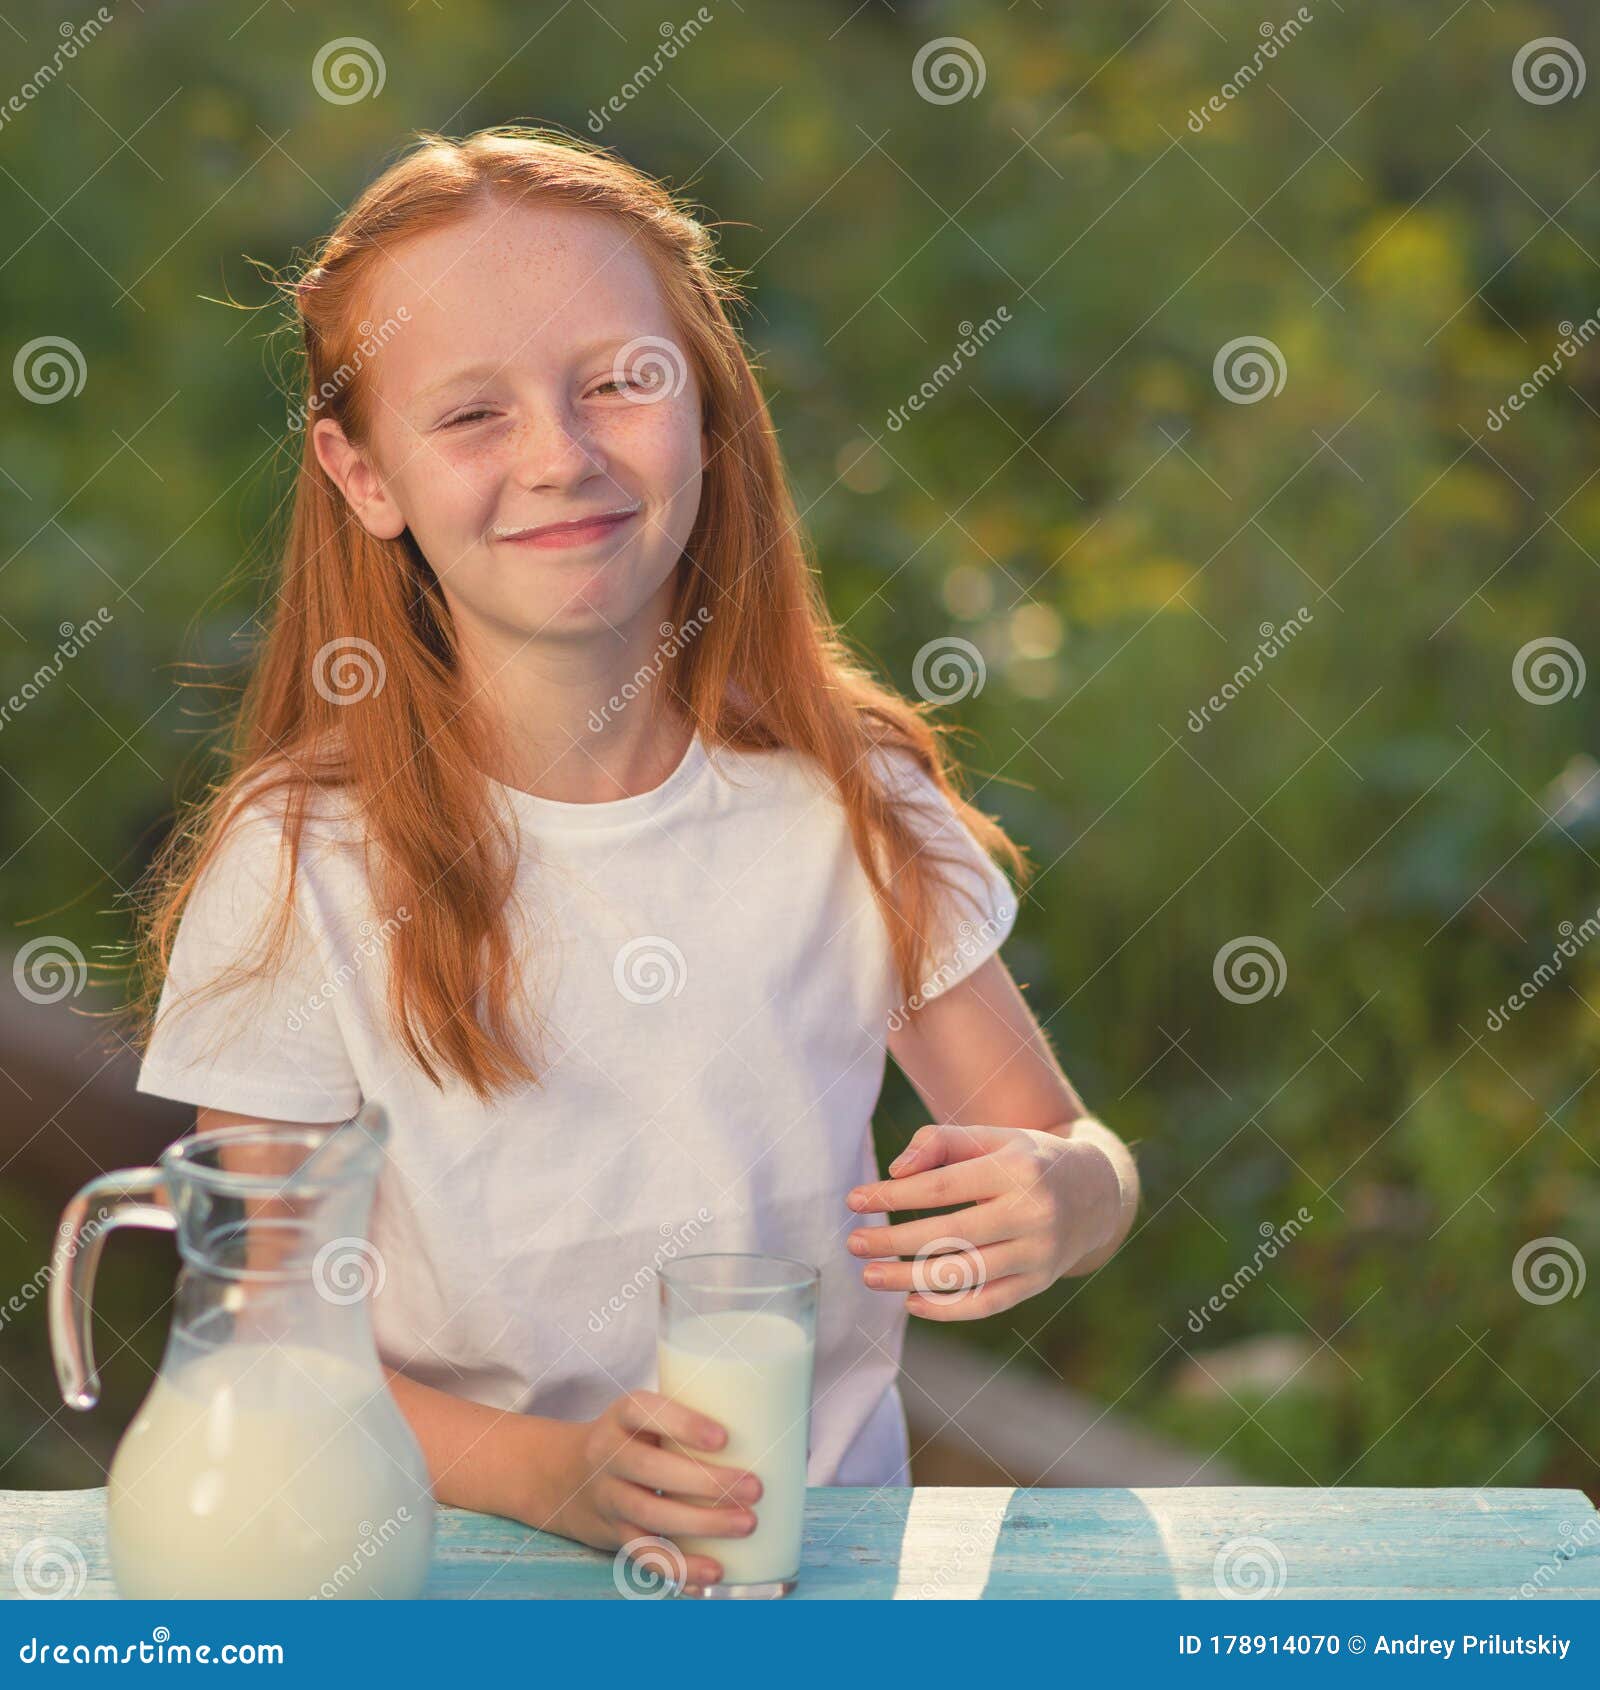 Beautiful Red-haired Girl with Long Hair Drinks Milk and Smiles. Drinking  Milk is Good for Health Stock Photo - Image of portrait, drinks: 178914070